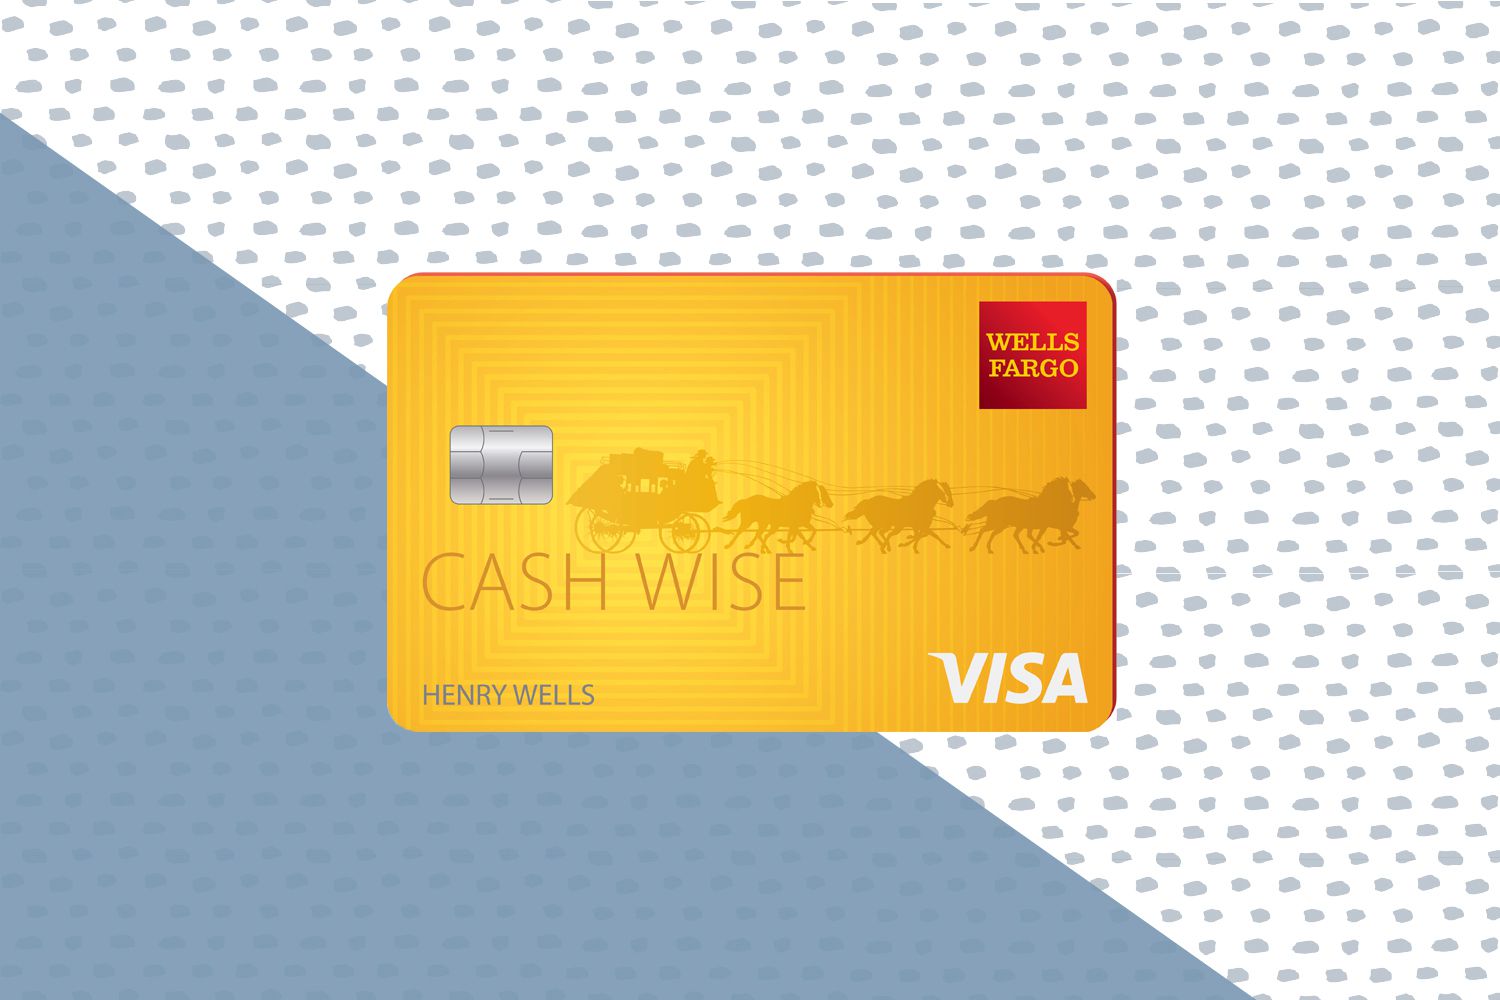 How to Order by Cell Phone - Wells Fargo Credit Cards: Cash Wise Visa